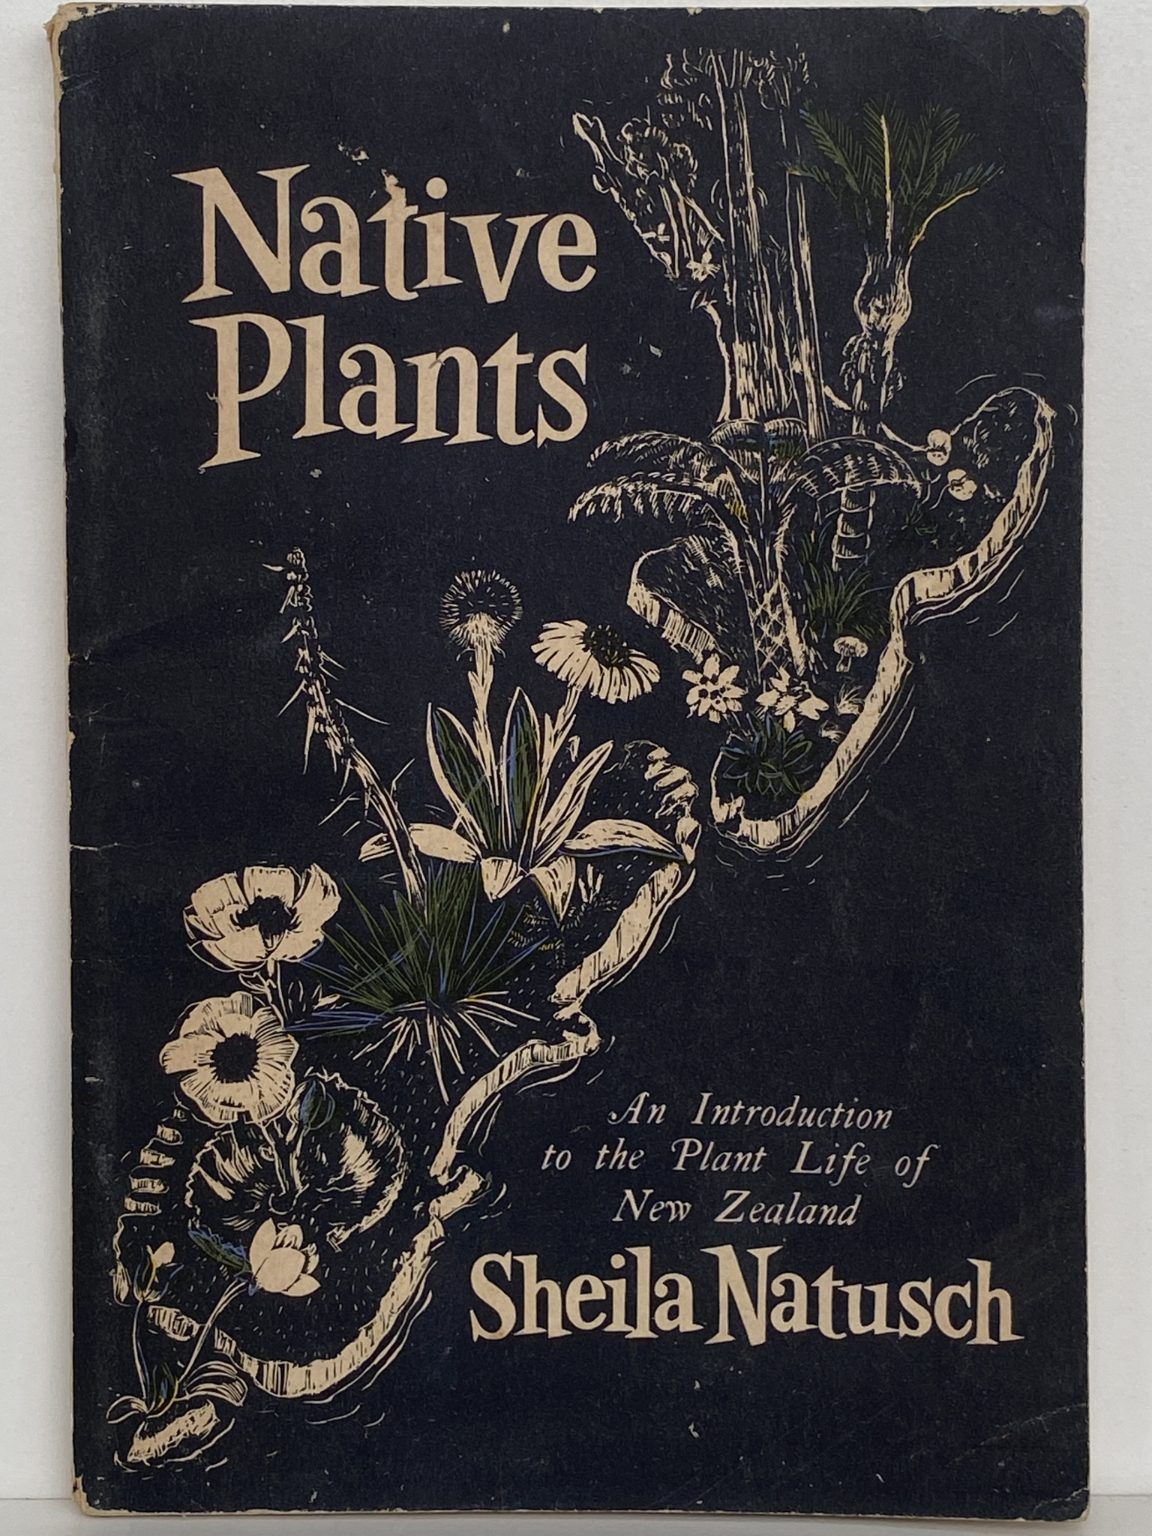 NATIVE PLANTS: An Introduction to the Plant Life of New Zealand